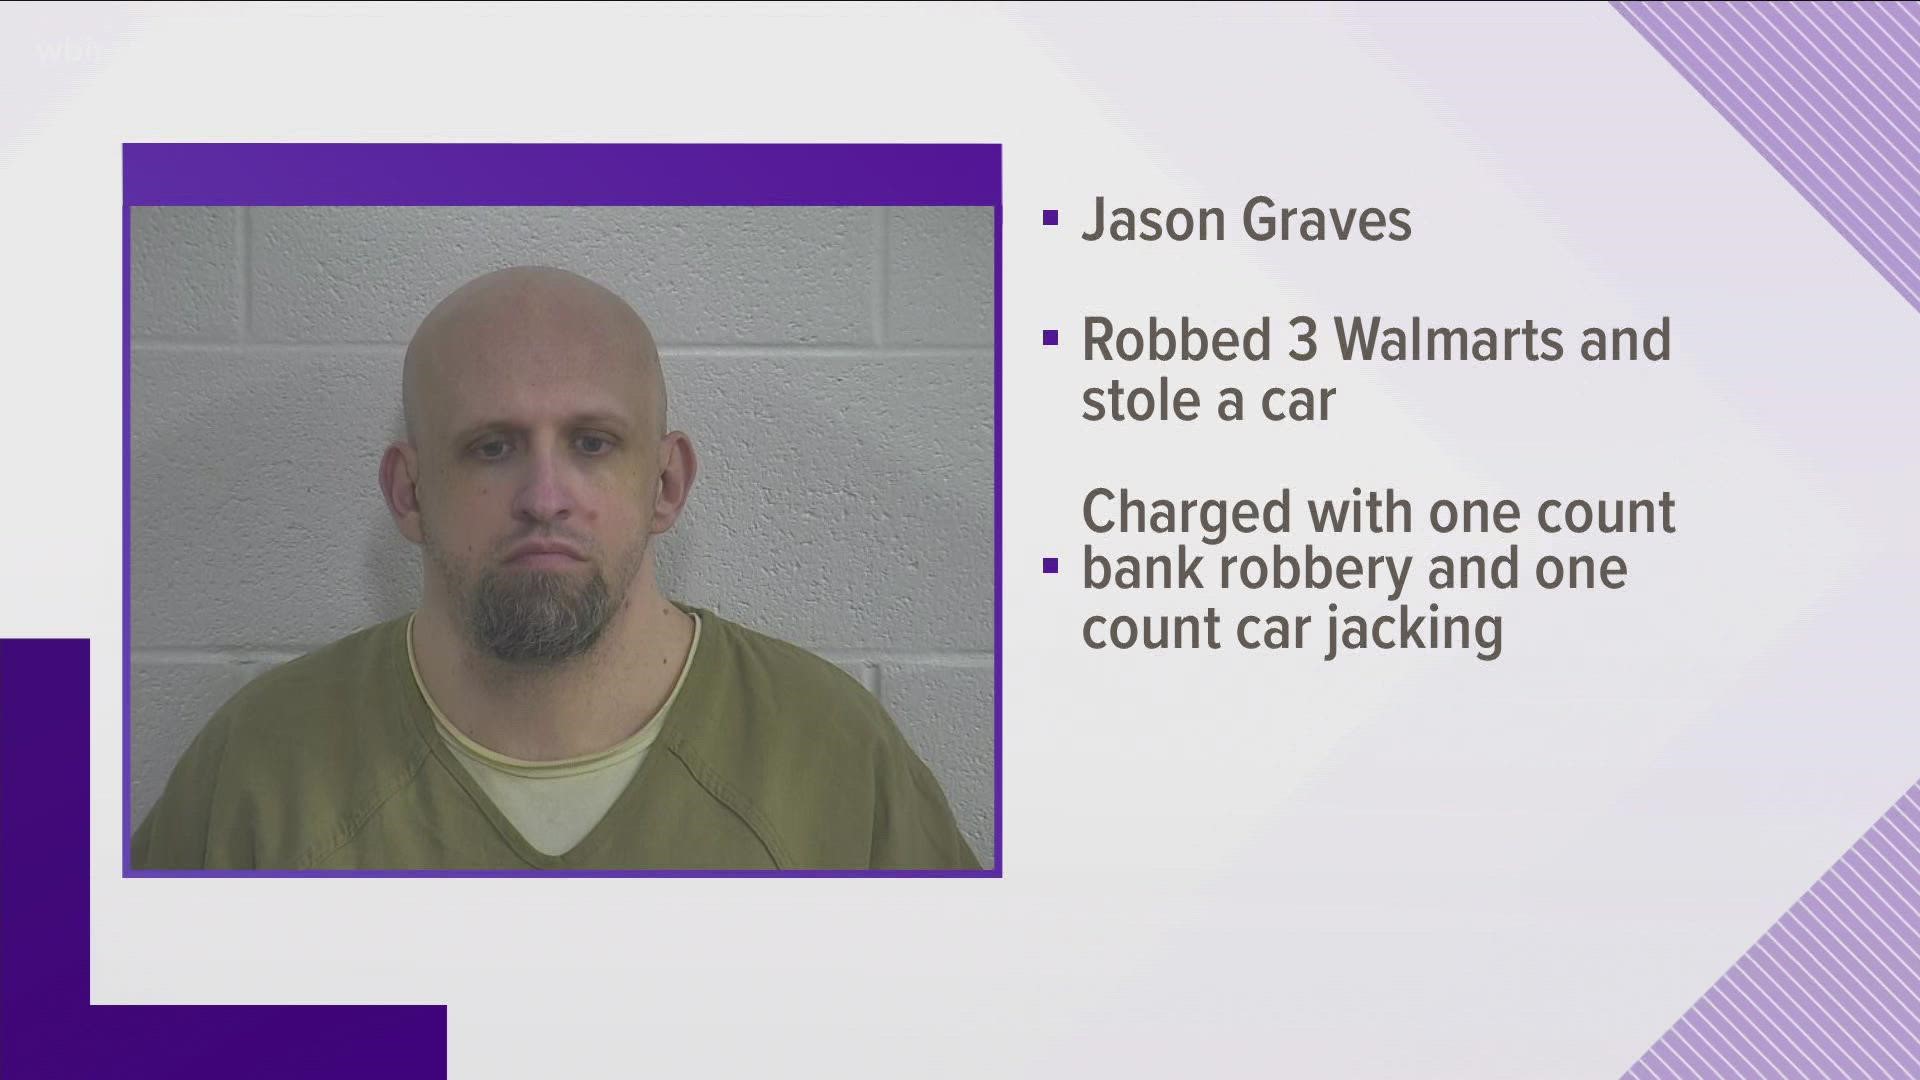 Jason Graves will spend more than 10 years in prison after pleading guilty to robbing 3 Walmarts and stealing a car.